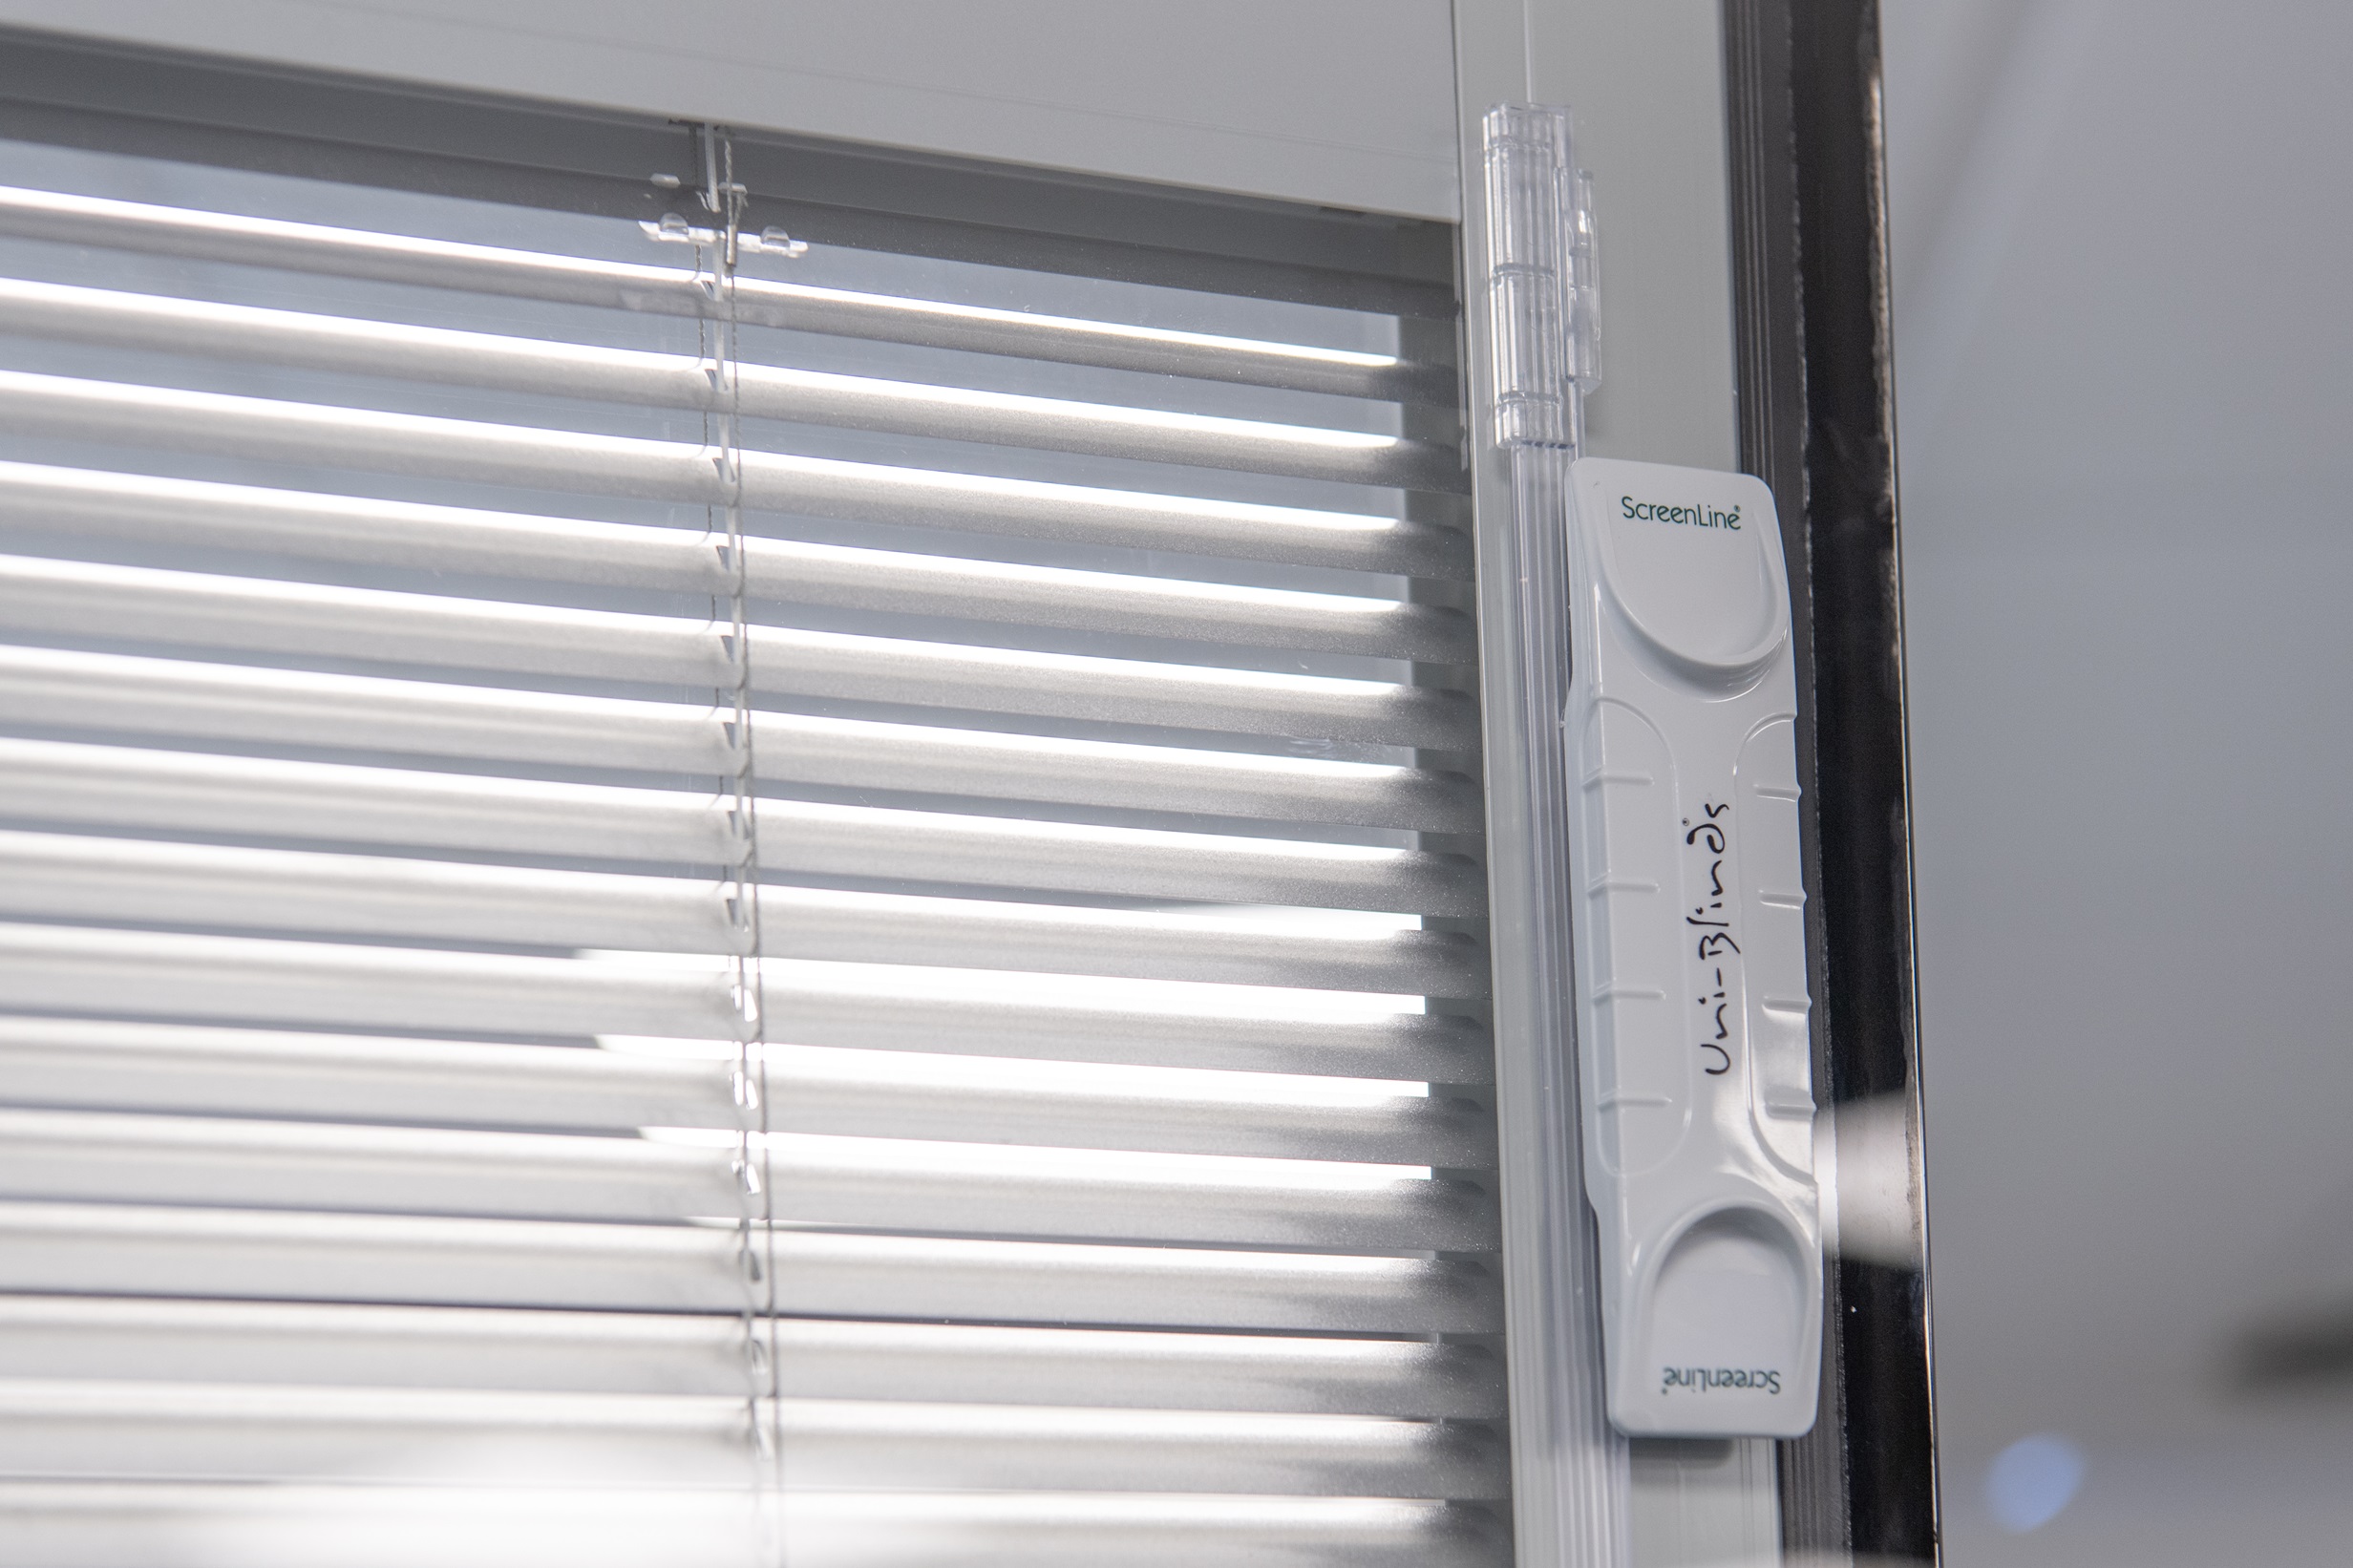 The magnetic slider device used to operate the SV & SV+ integral blind systems.